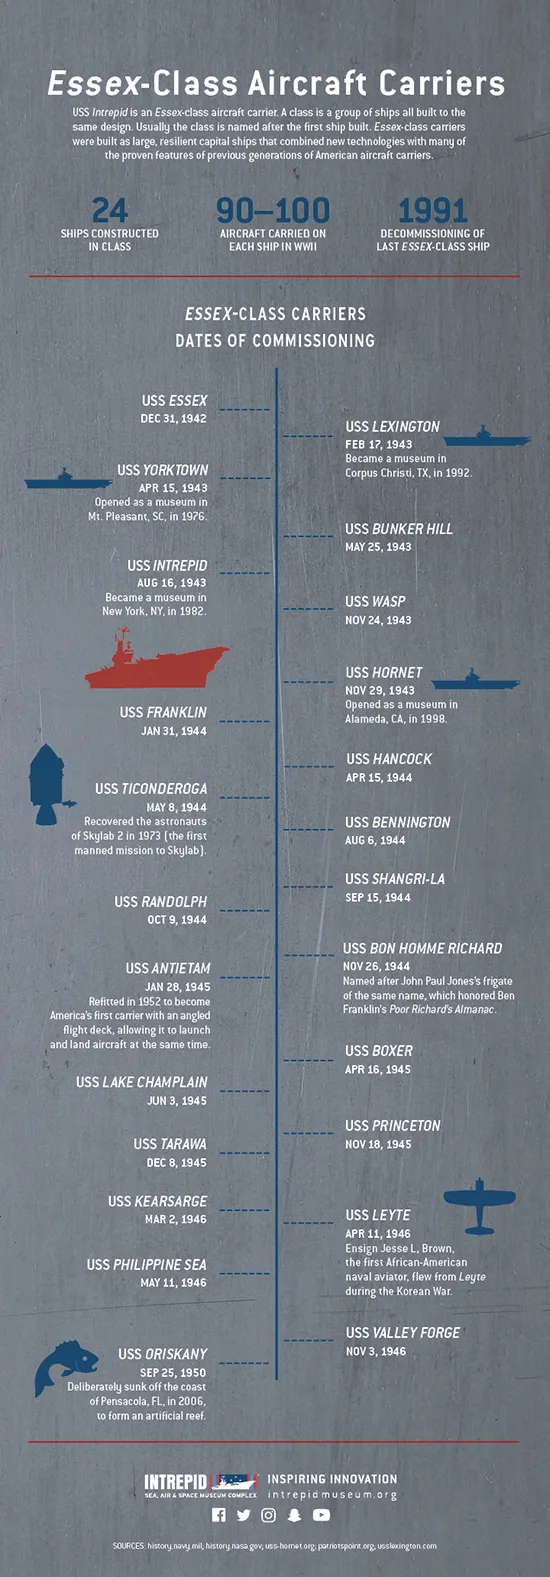 essex aircraft carriers infographic